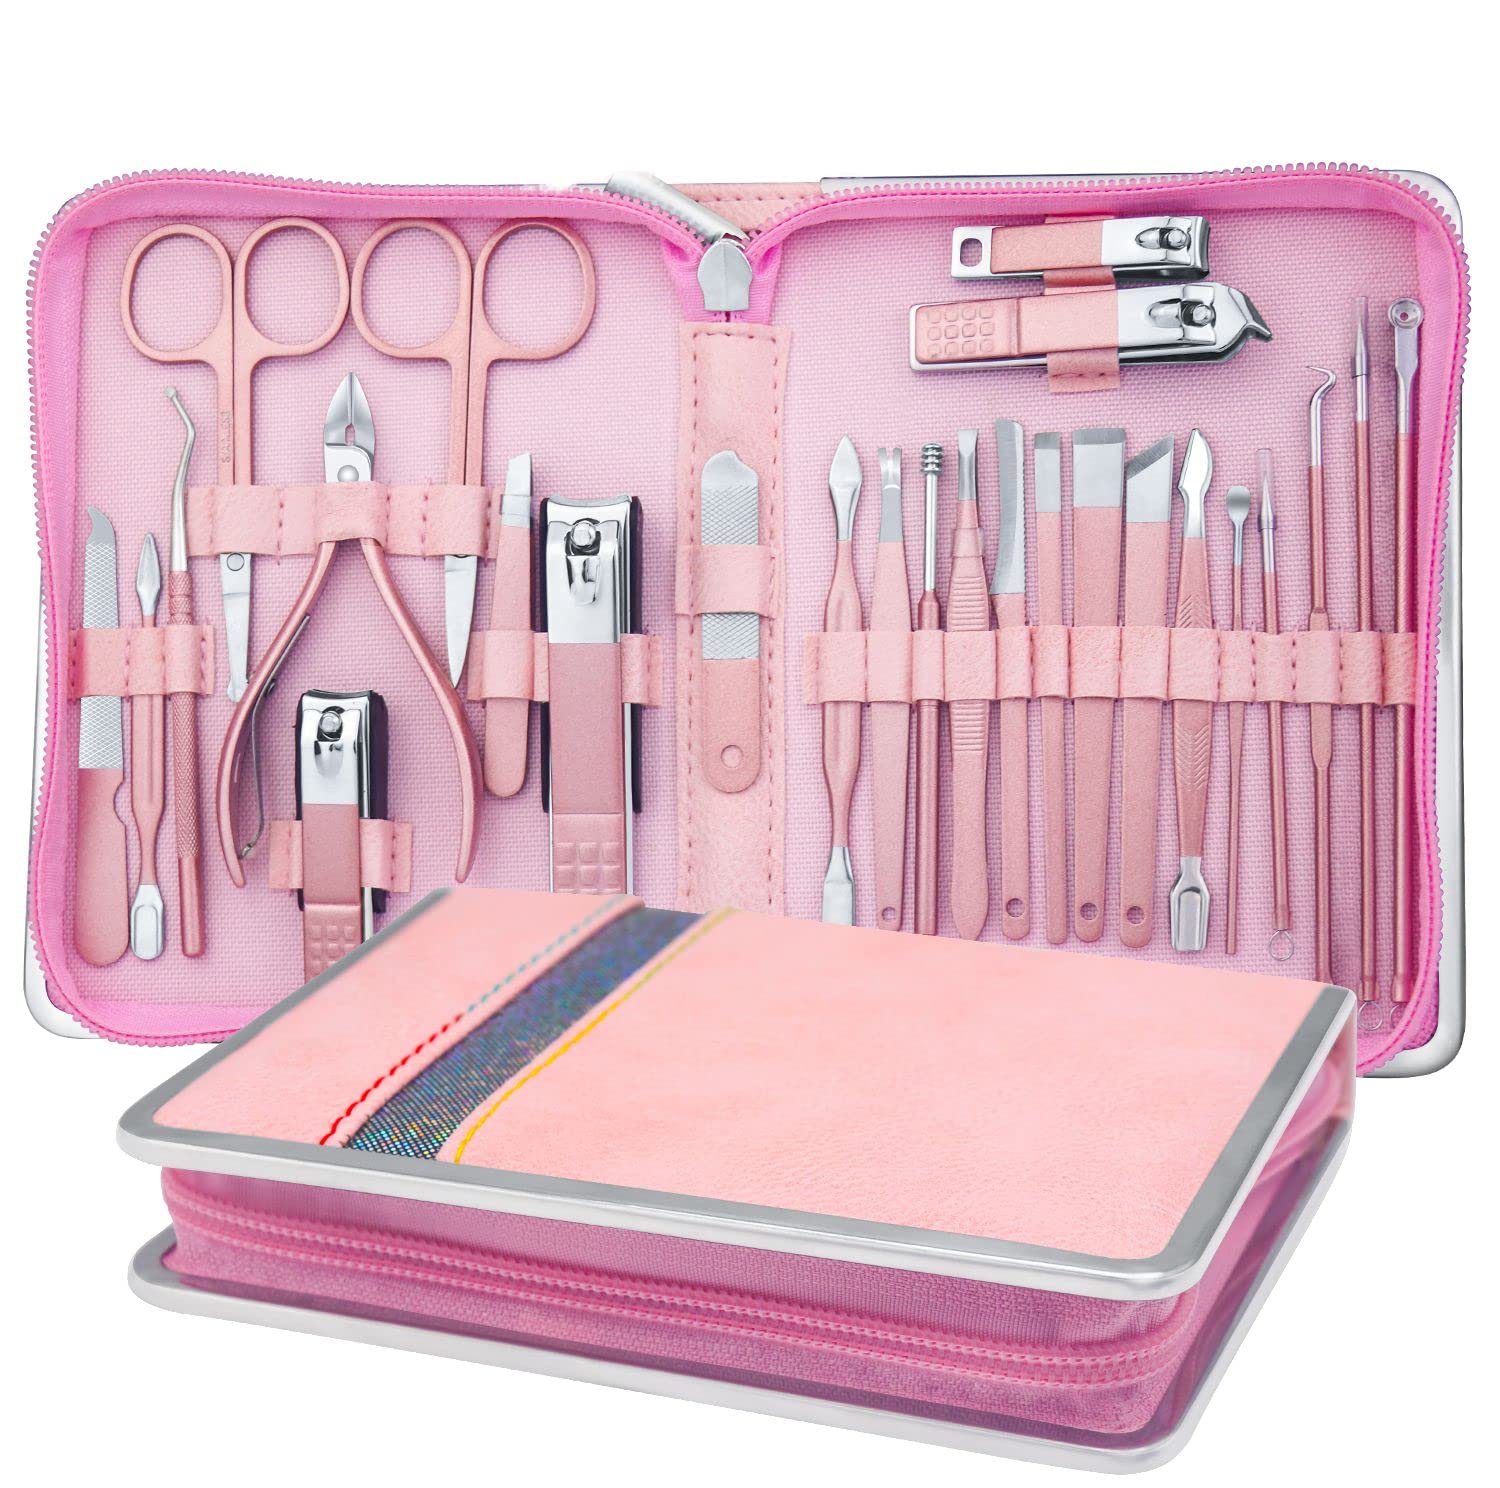 Manicure Set-18 In 1 Stainless Steel Nail Care Set-Professional Ingrown  Toenail Clipper Grooming Tool-Pedicure Kit with Toe Nail Cutter-Thick Nail  Scissors Toiletries with Cuticle Trimmer : Amazon.in: Beauty